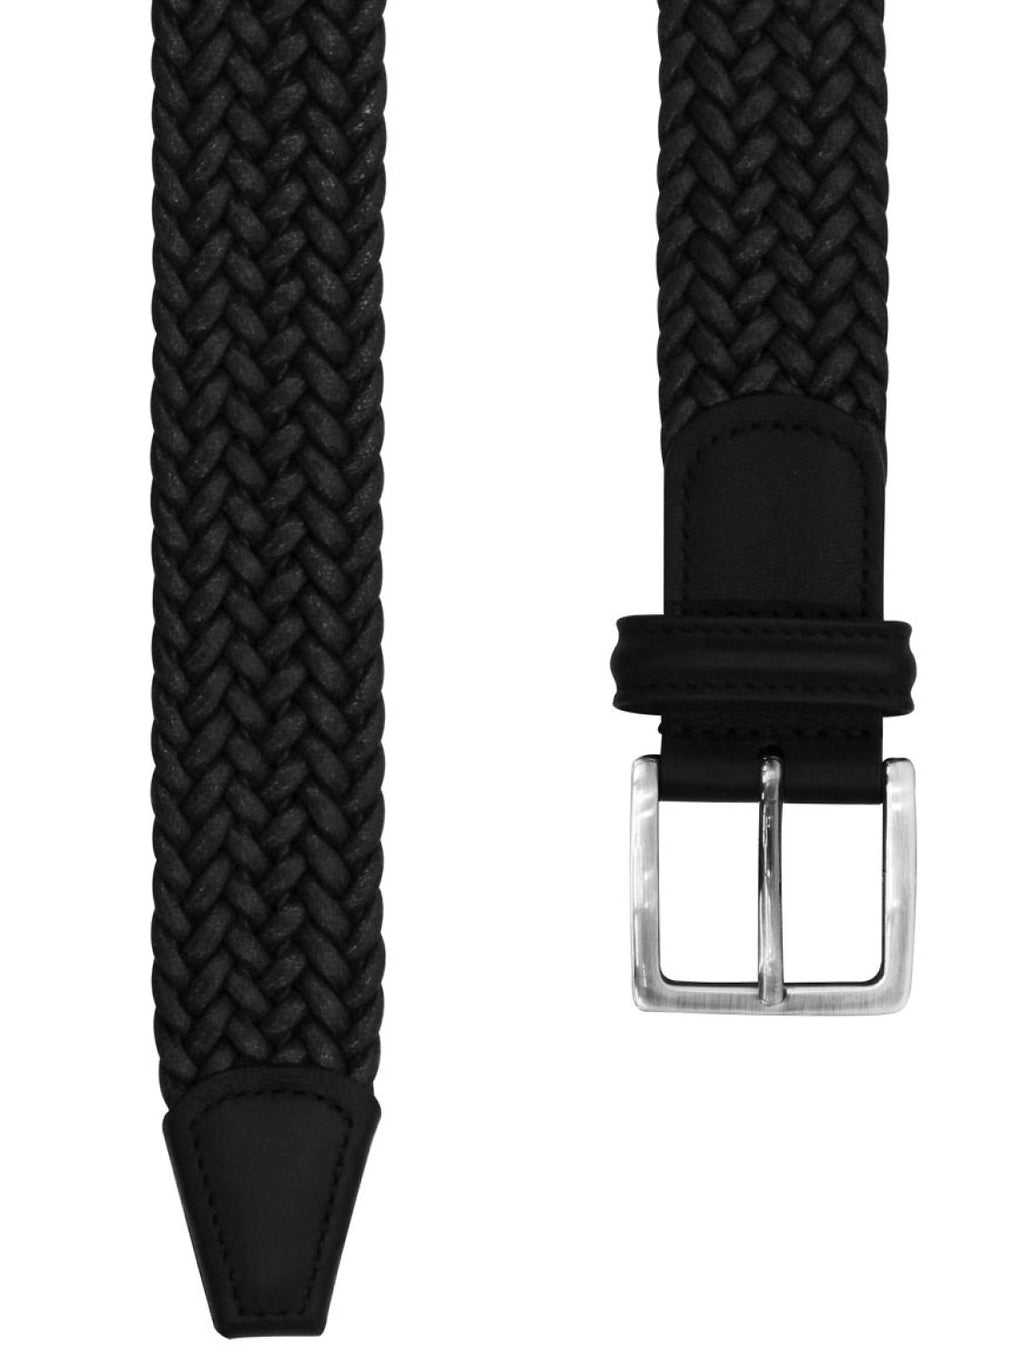 Anderson’s Waxed Leather-Trimmed Woven Belt Black